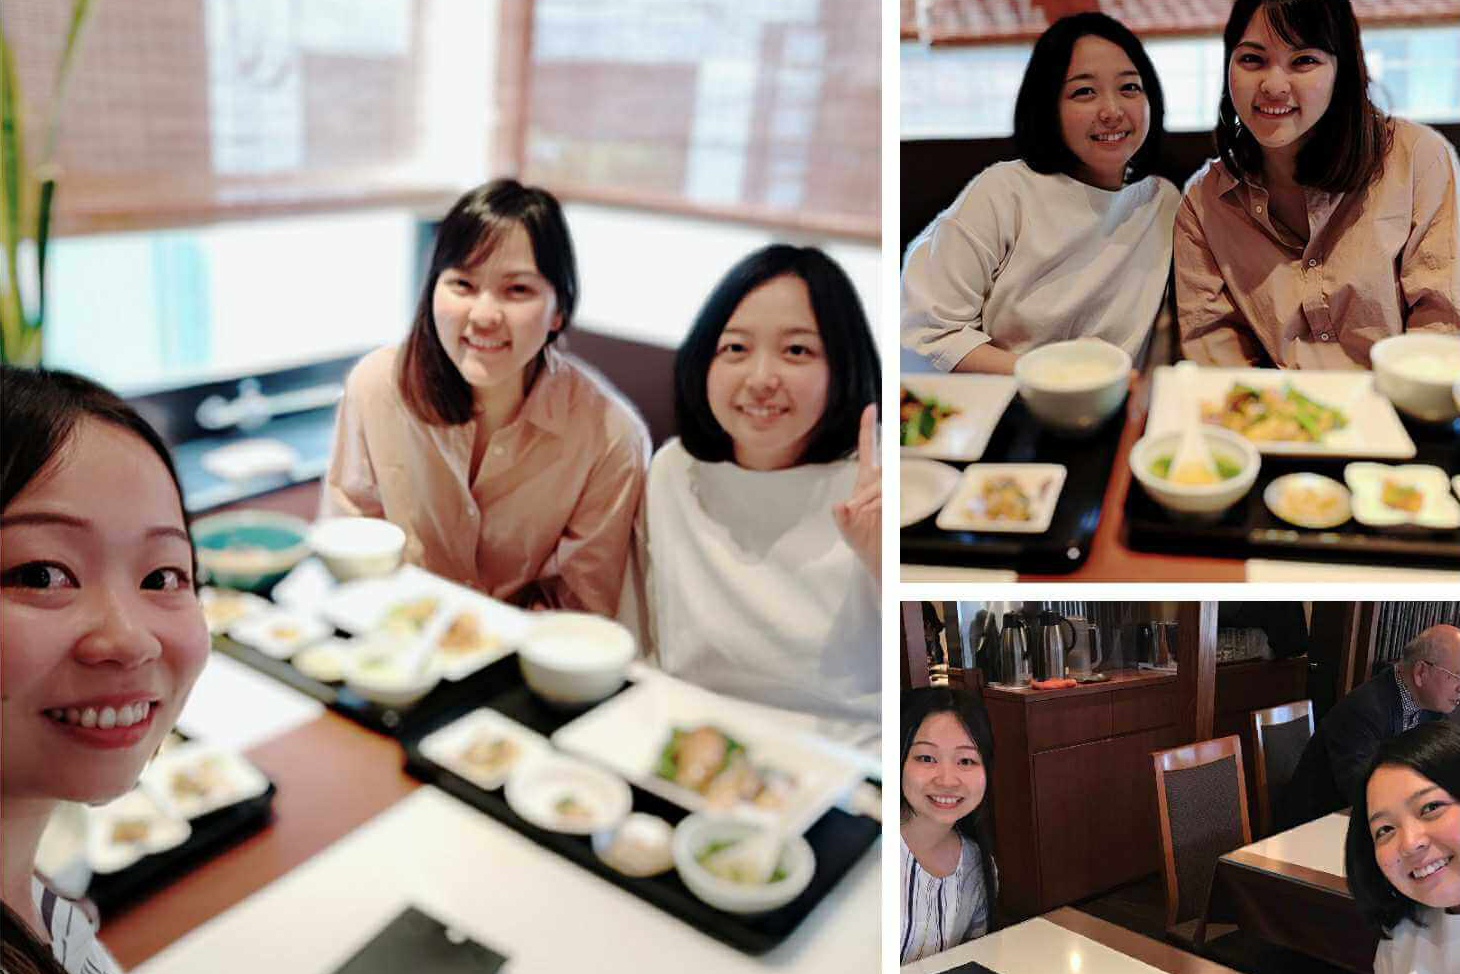 Lunch-out together